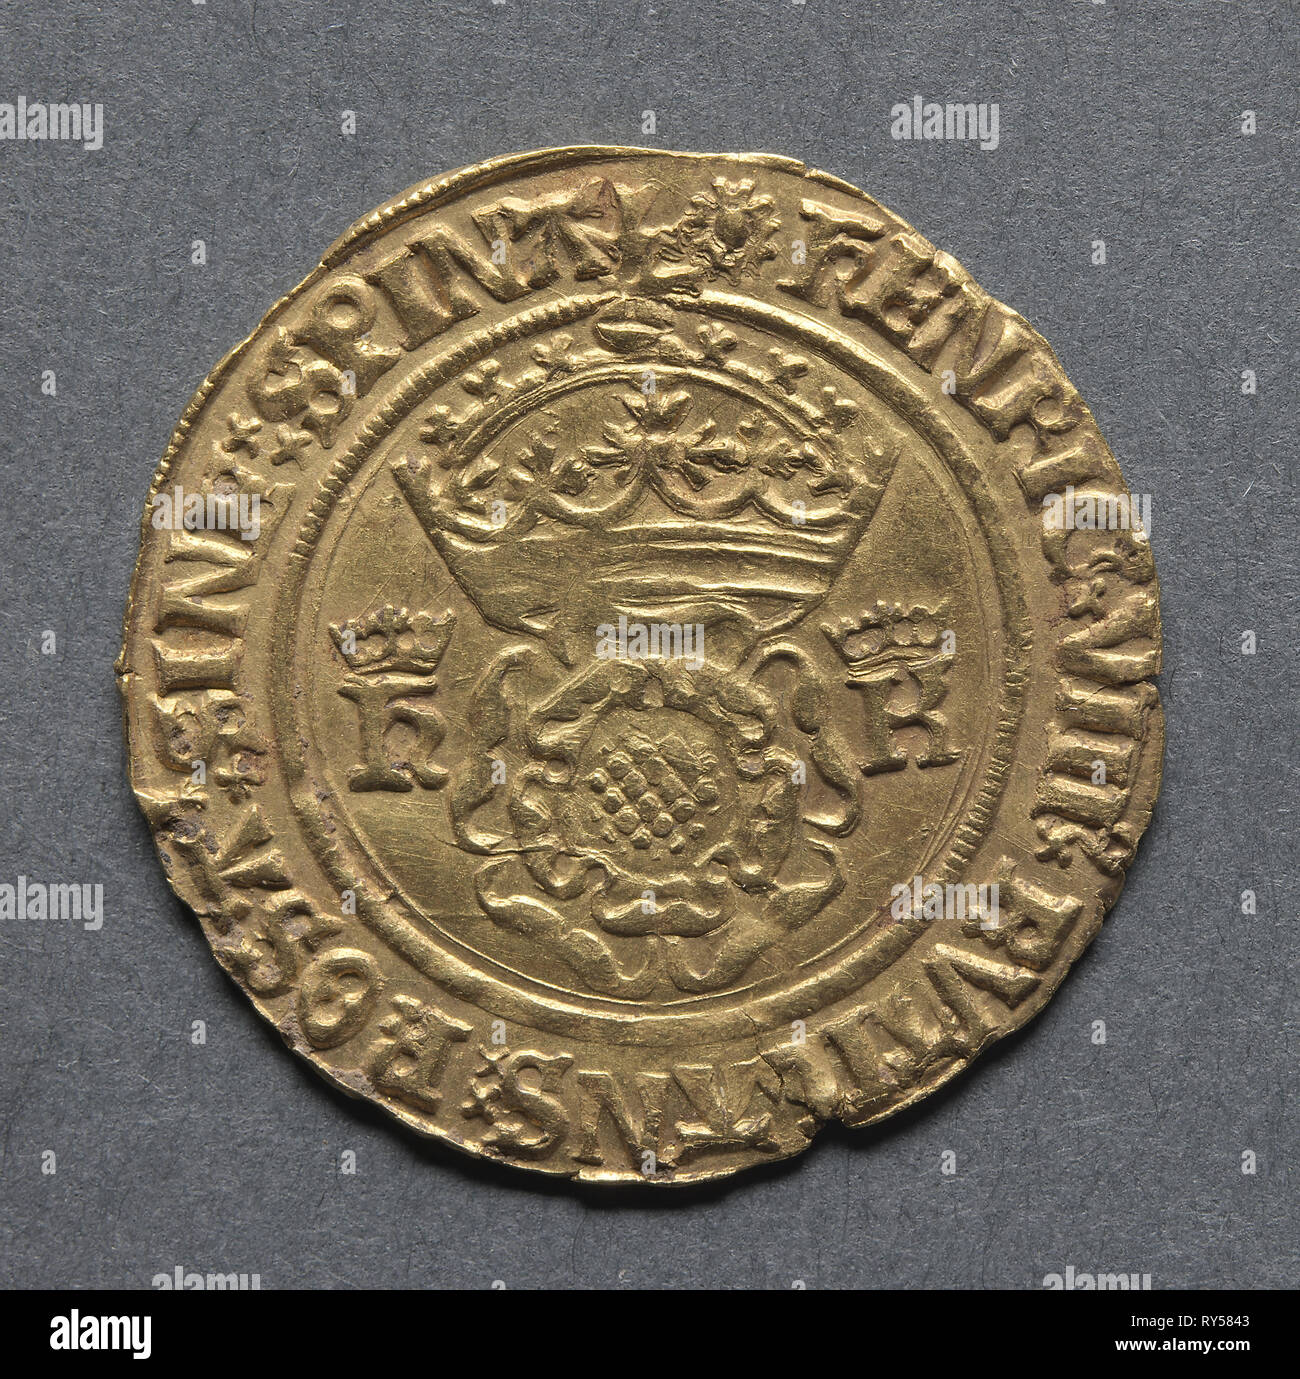 Crown of the Double Rose (obverse), 1526-1544. England, Henry VIII, 1509-1547. Gold Stock Photo